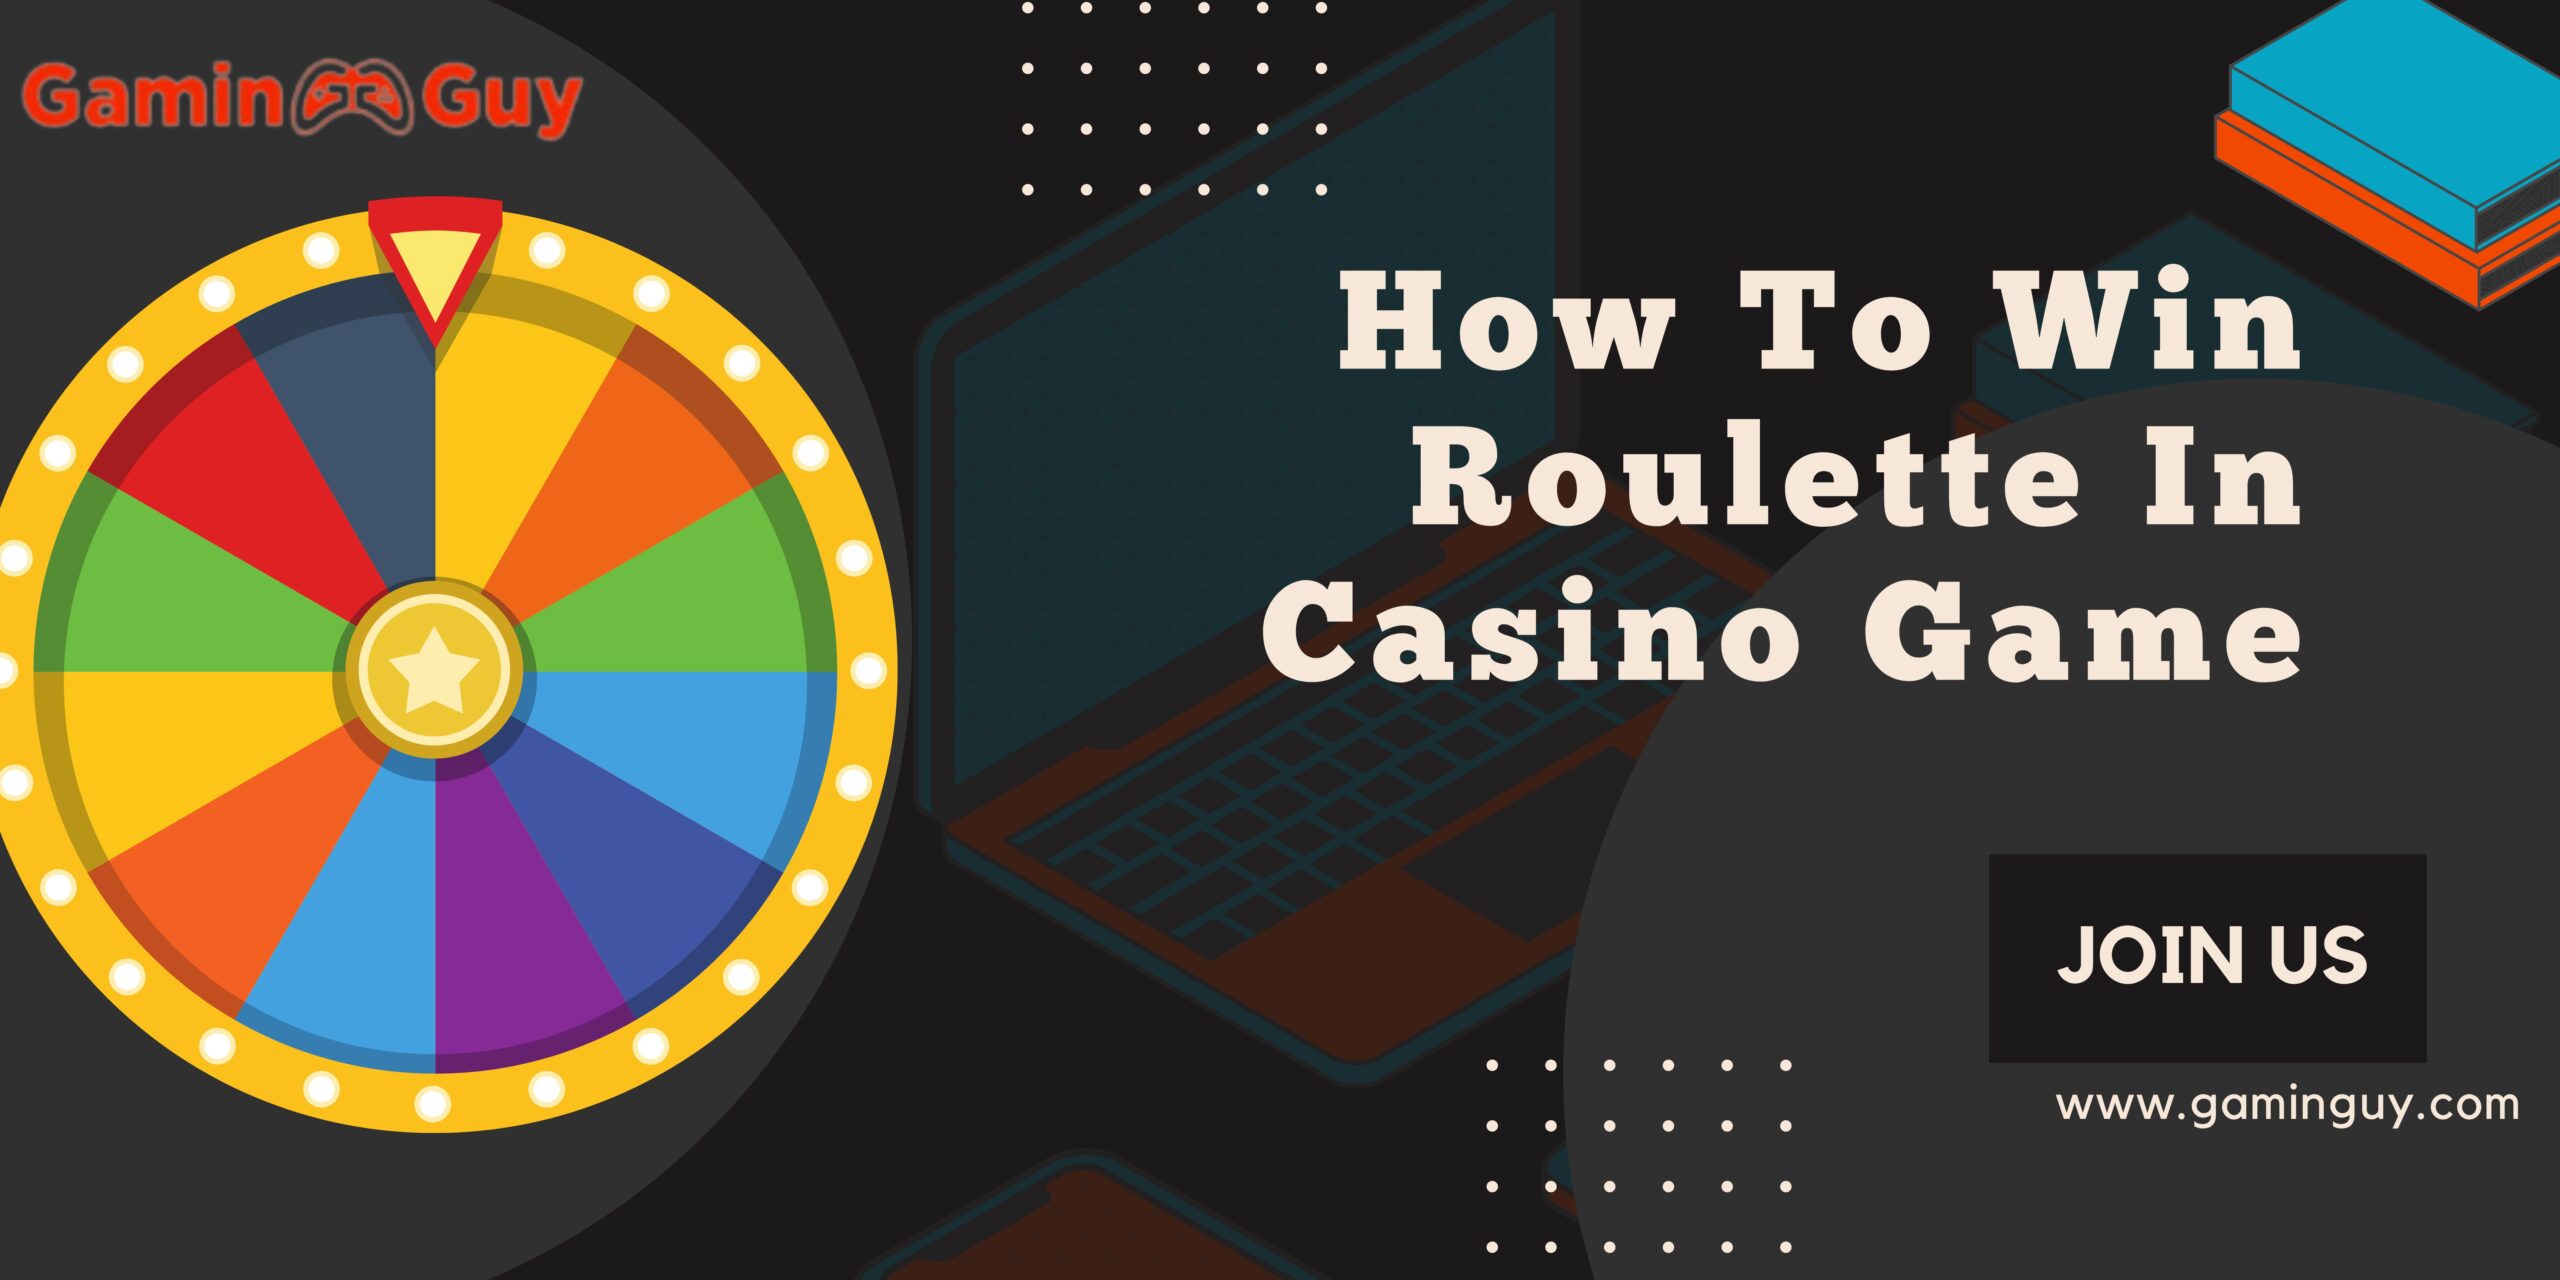 How To Win Roulette In Casino Game